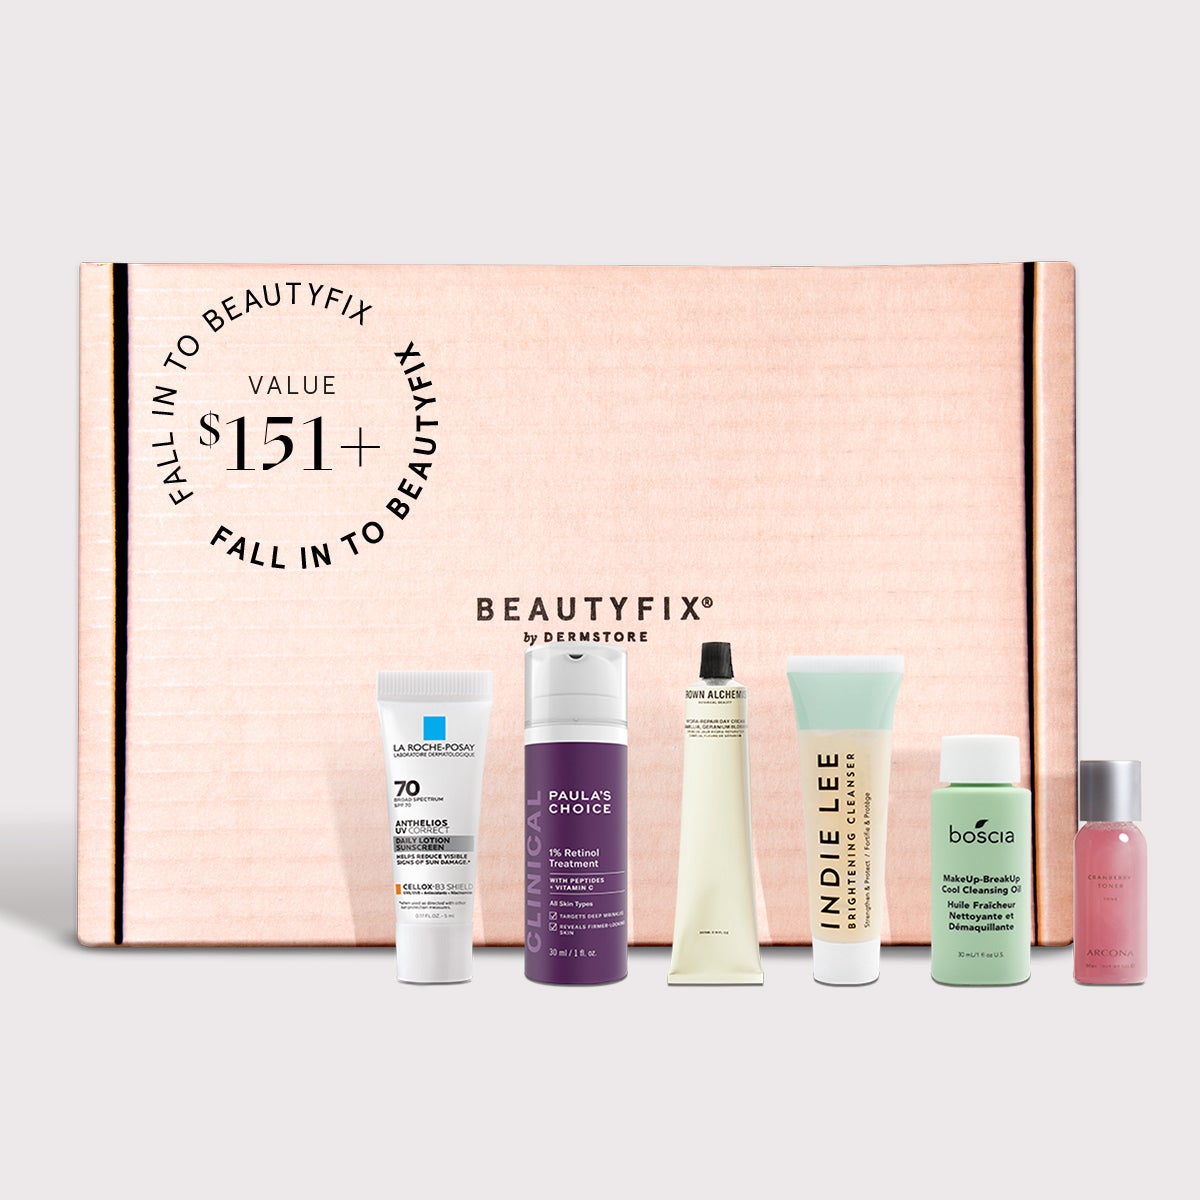 Falling for BeautyFIX. Fortify your skin for cooler weather to come with this month’s BeautyFIX. GET YOUR BEAUTYFIX